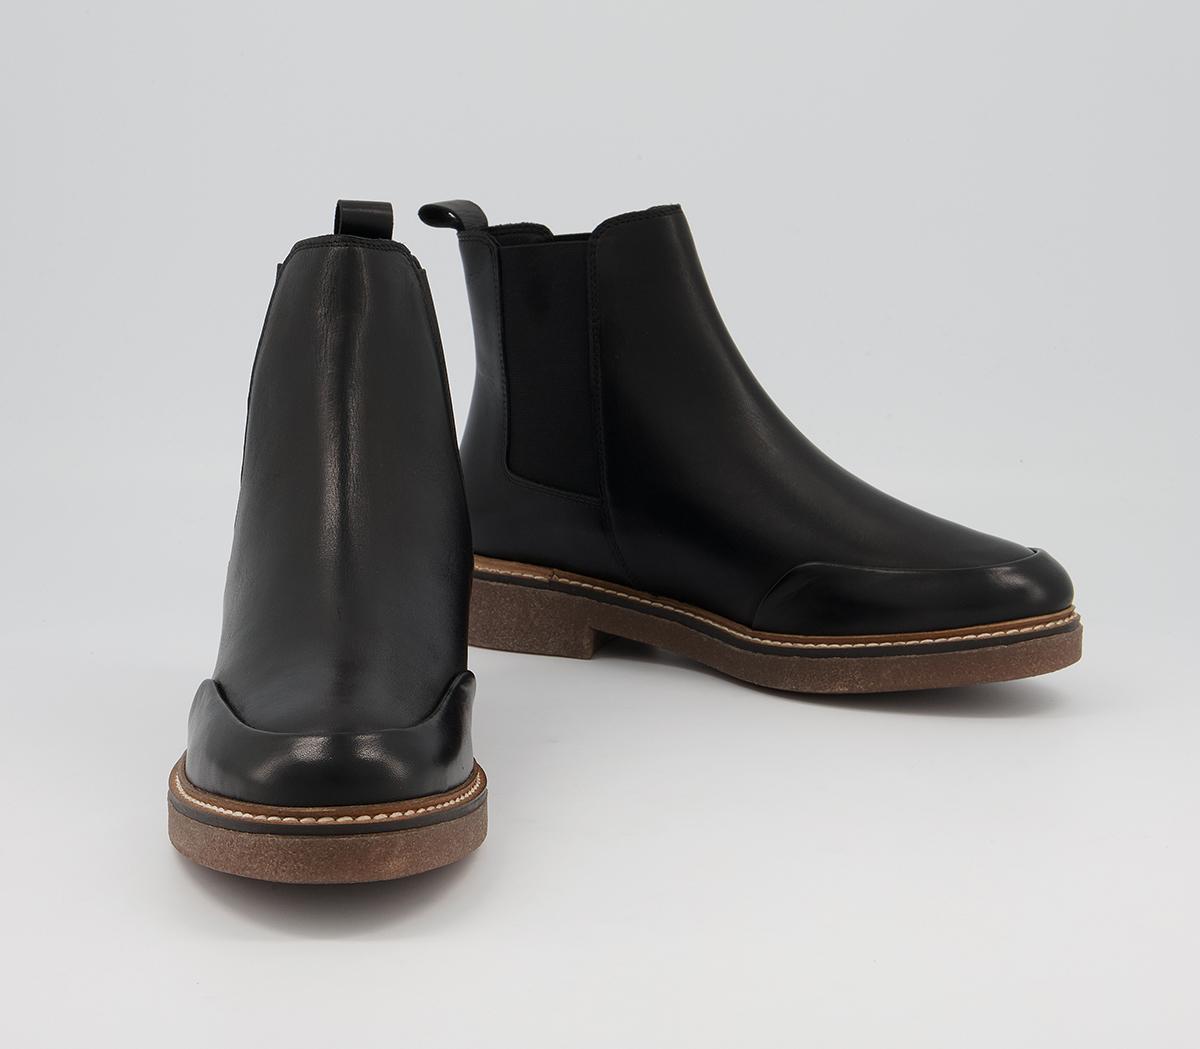 OFFICE Actioning Crepe Sole Chelsea Boots Black Leather - Women's Ankle ...